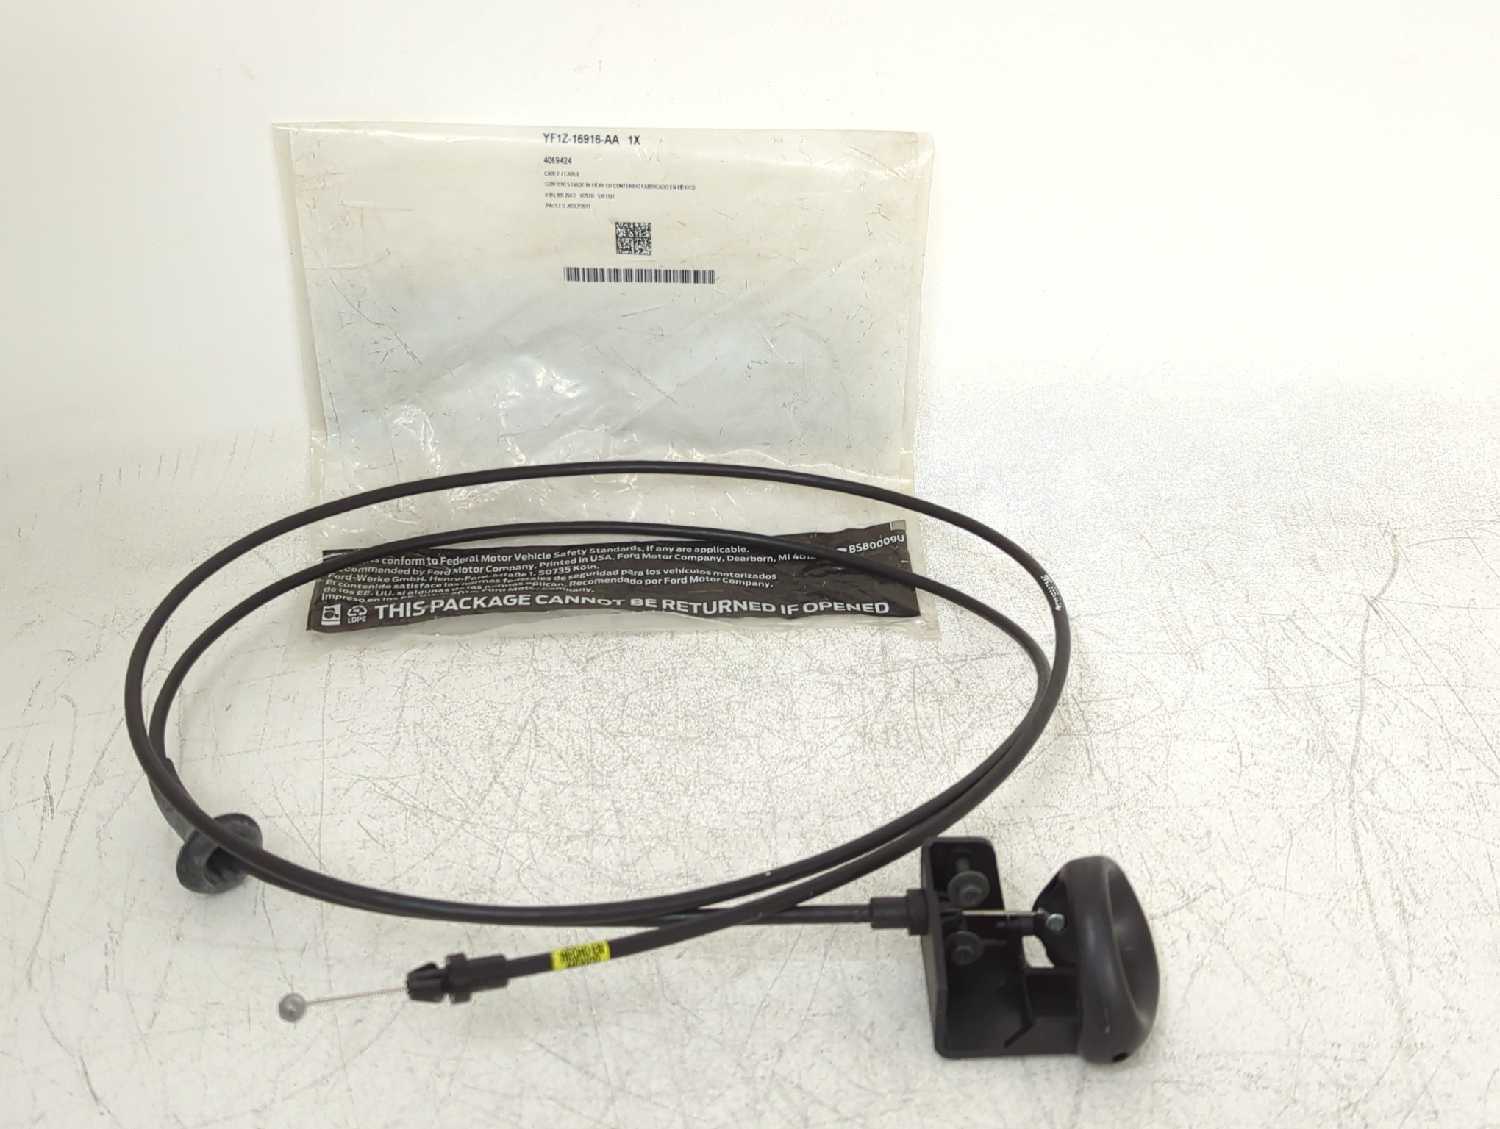 New OEM Genuine Ford Hood Release Cable 1996-2007 Taurus Sable YF1Z-16916-AA - $34.65